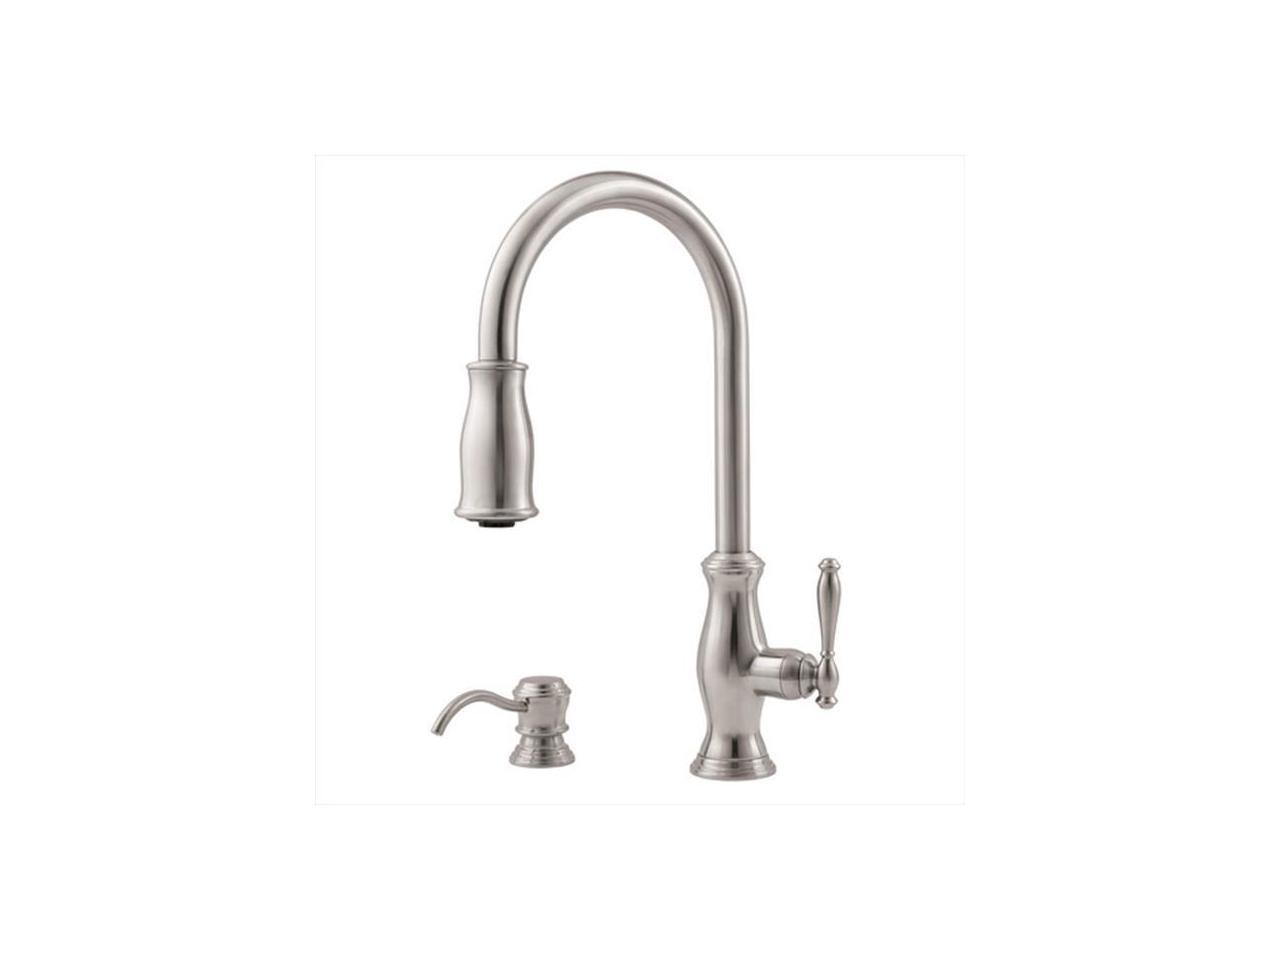 Price Pfister Gt529tms Hanover Single Handle 2 Or 4 Hole Pull Down Lead Free Kitchen Faucet With Soap Dispenser In Stainless Steel Neweggcom